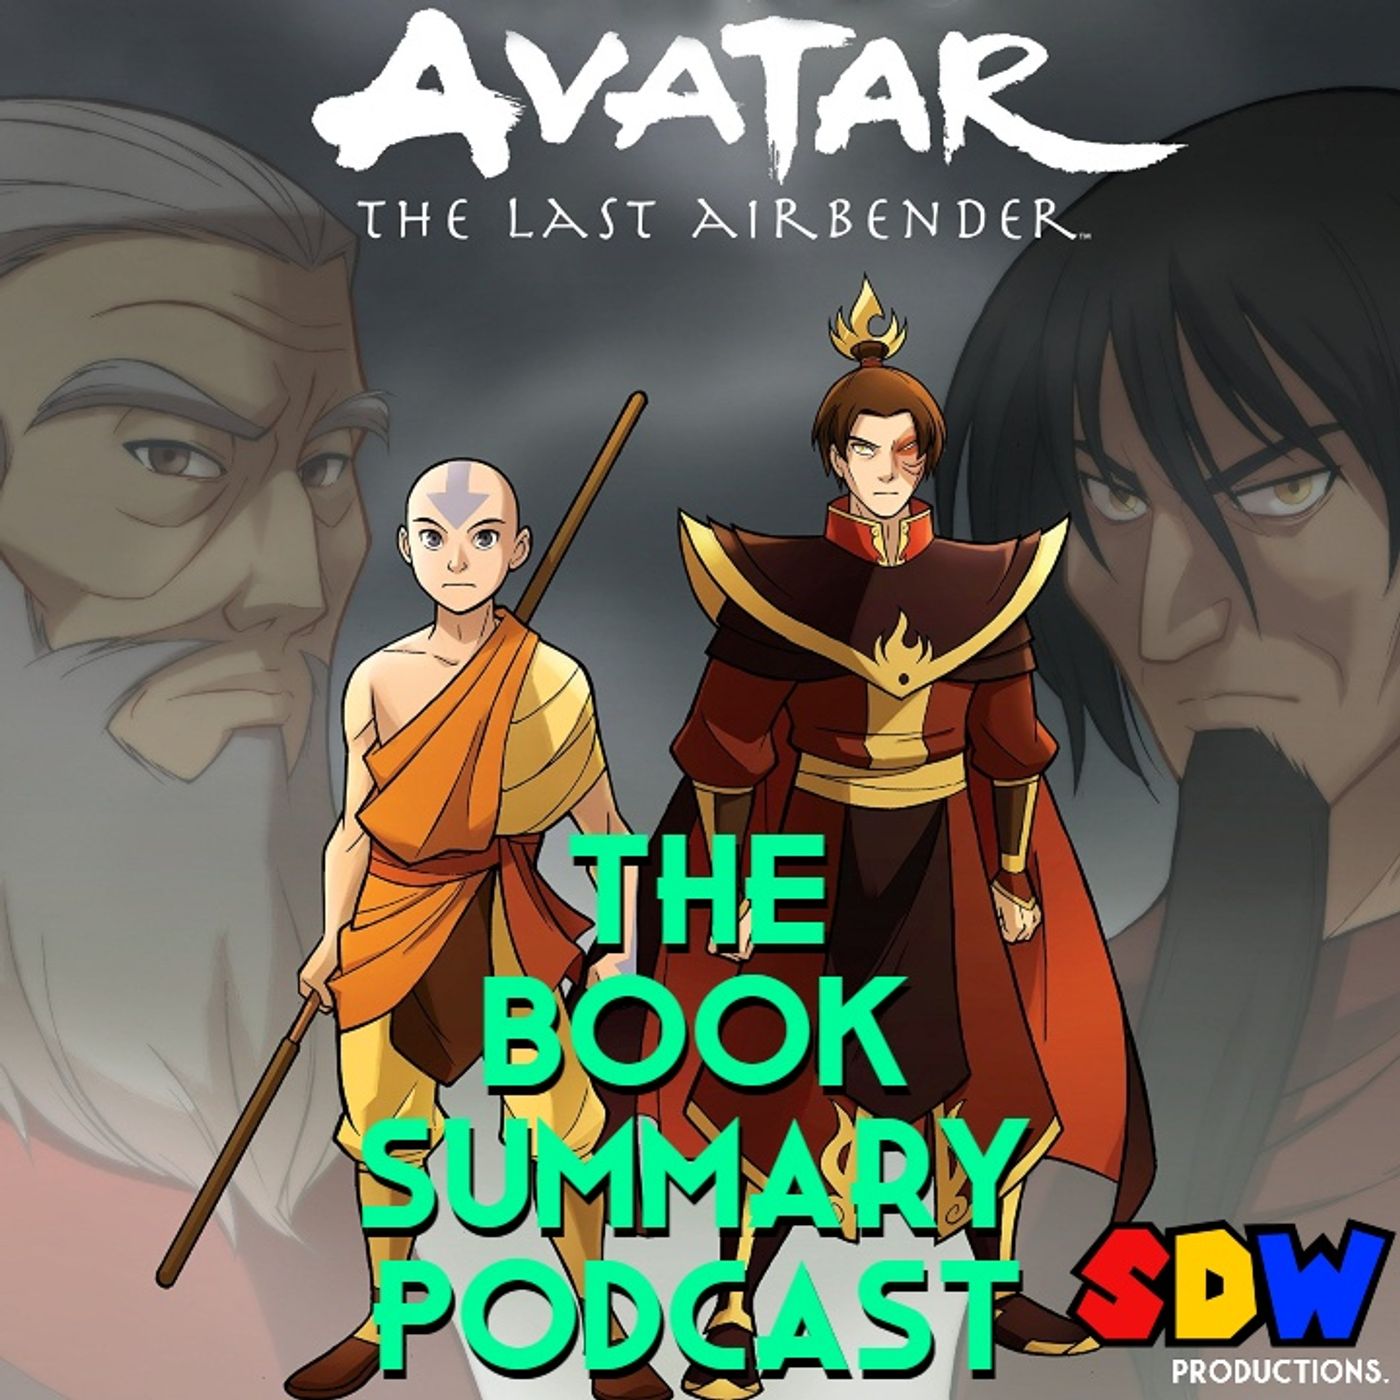 Avatar: The Last Airbender "The Promise" - Chapter 0